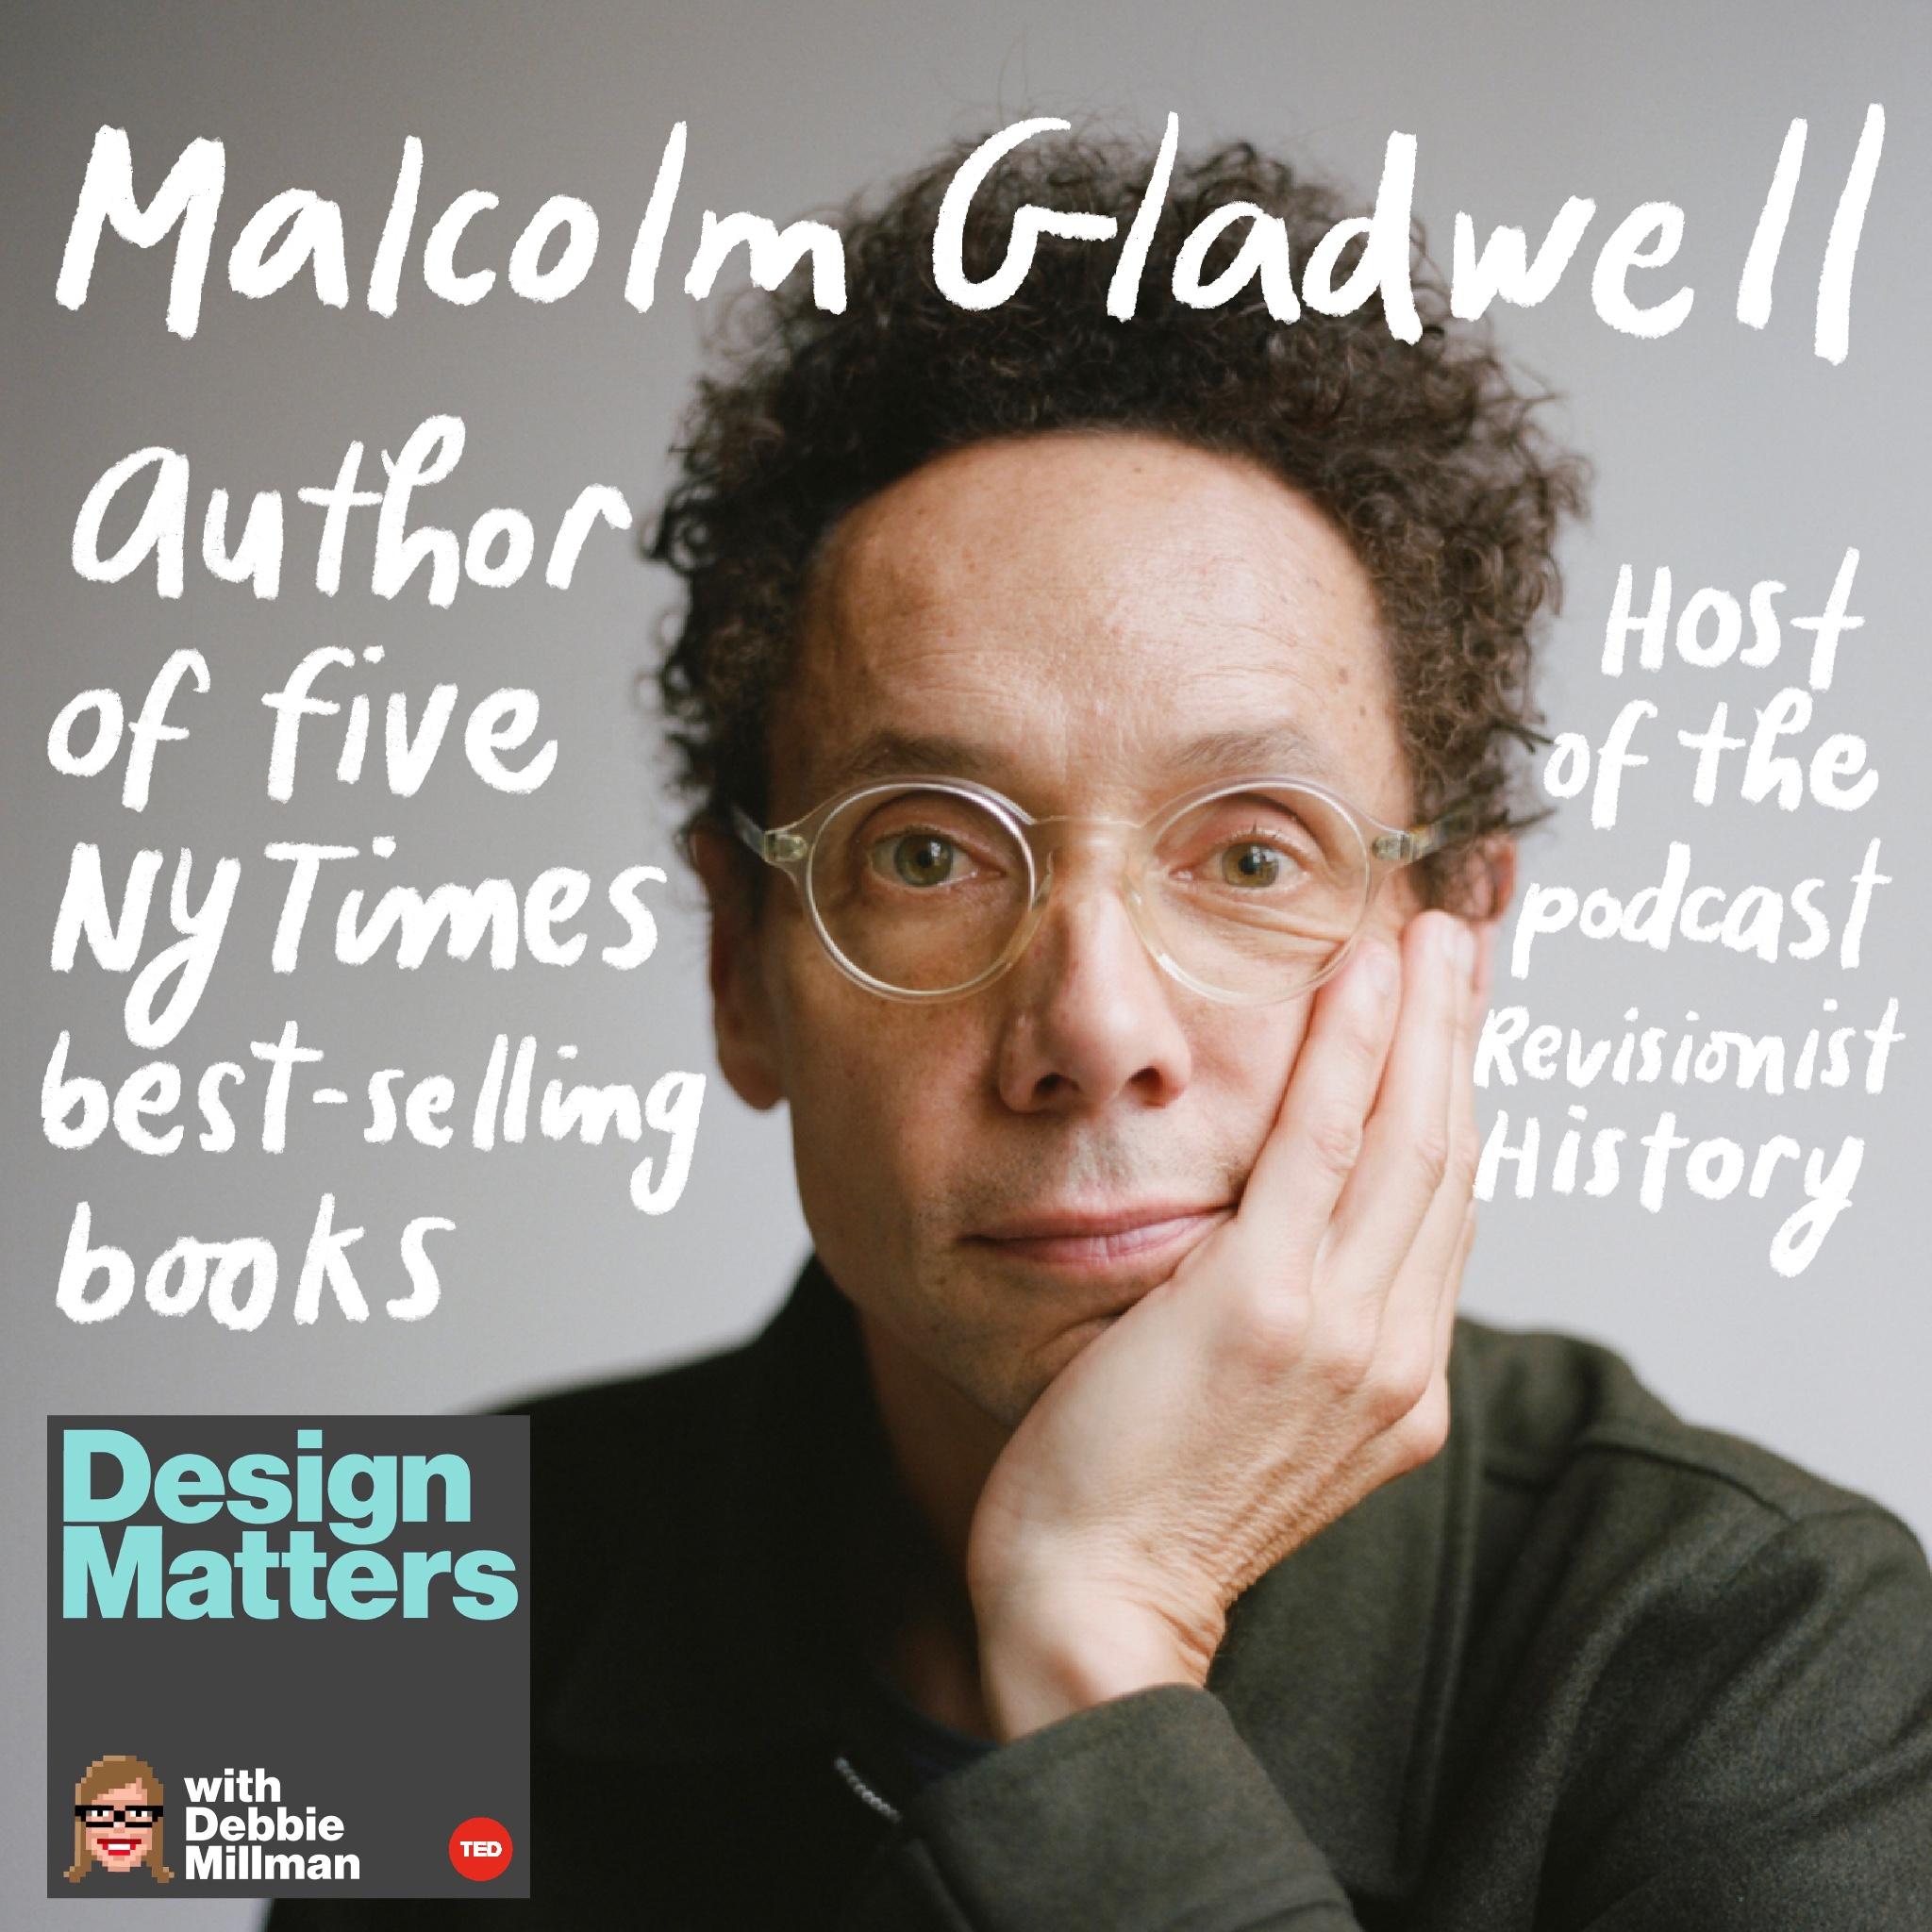 Thumbnail for "Design Matters From the Archive: Malcolm Gladwell".